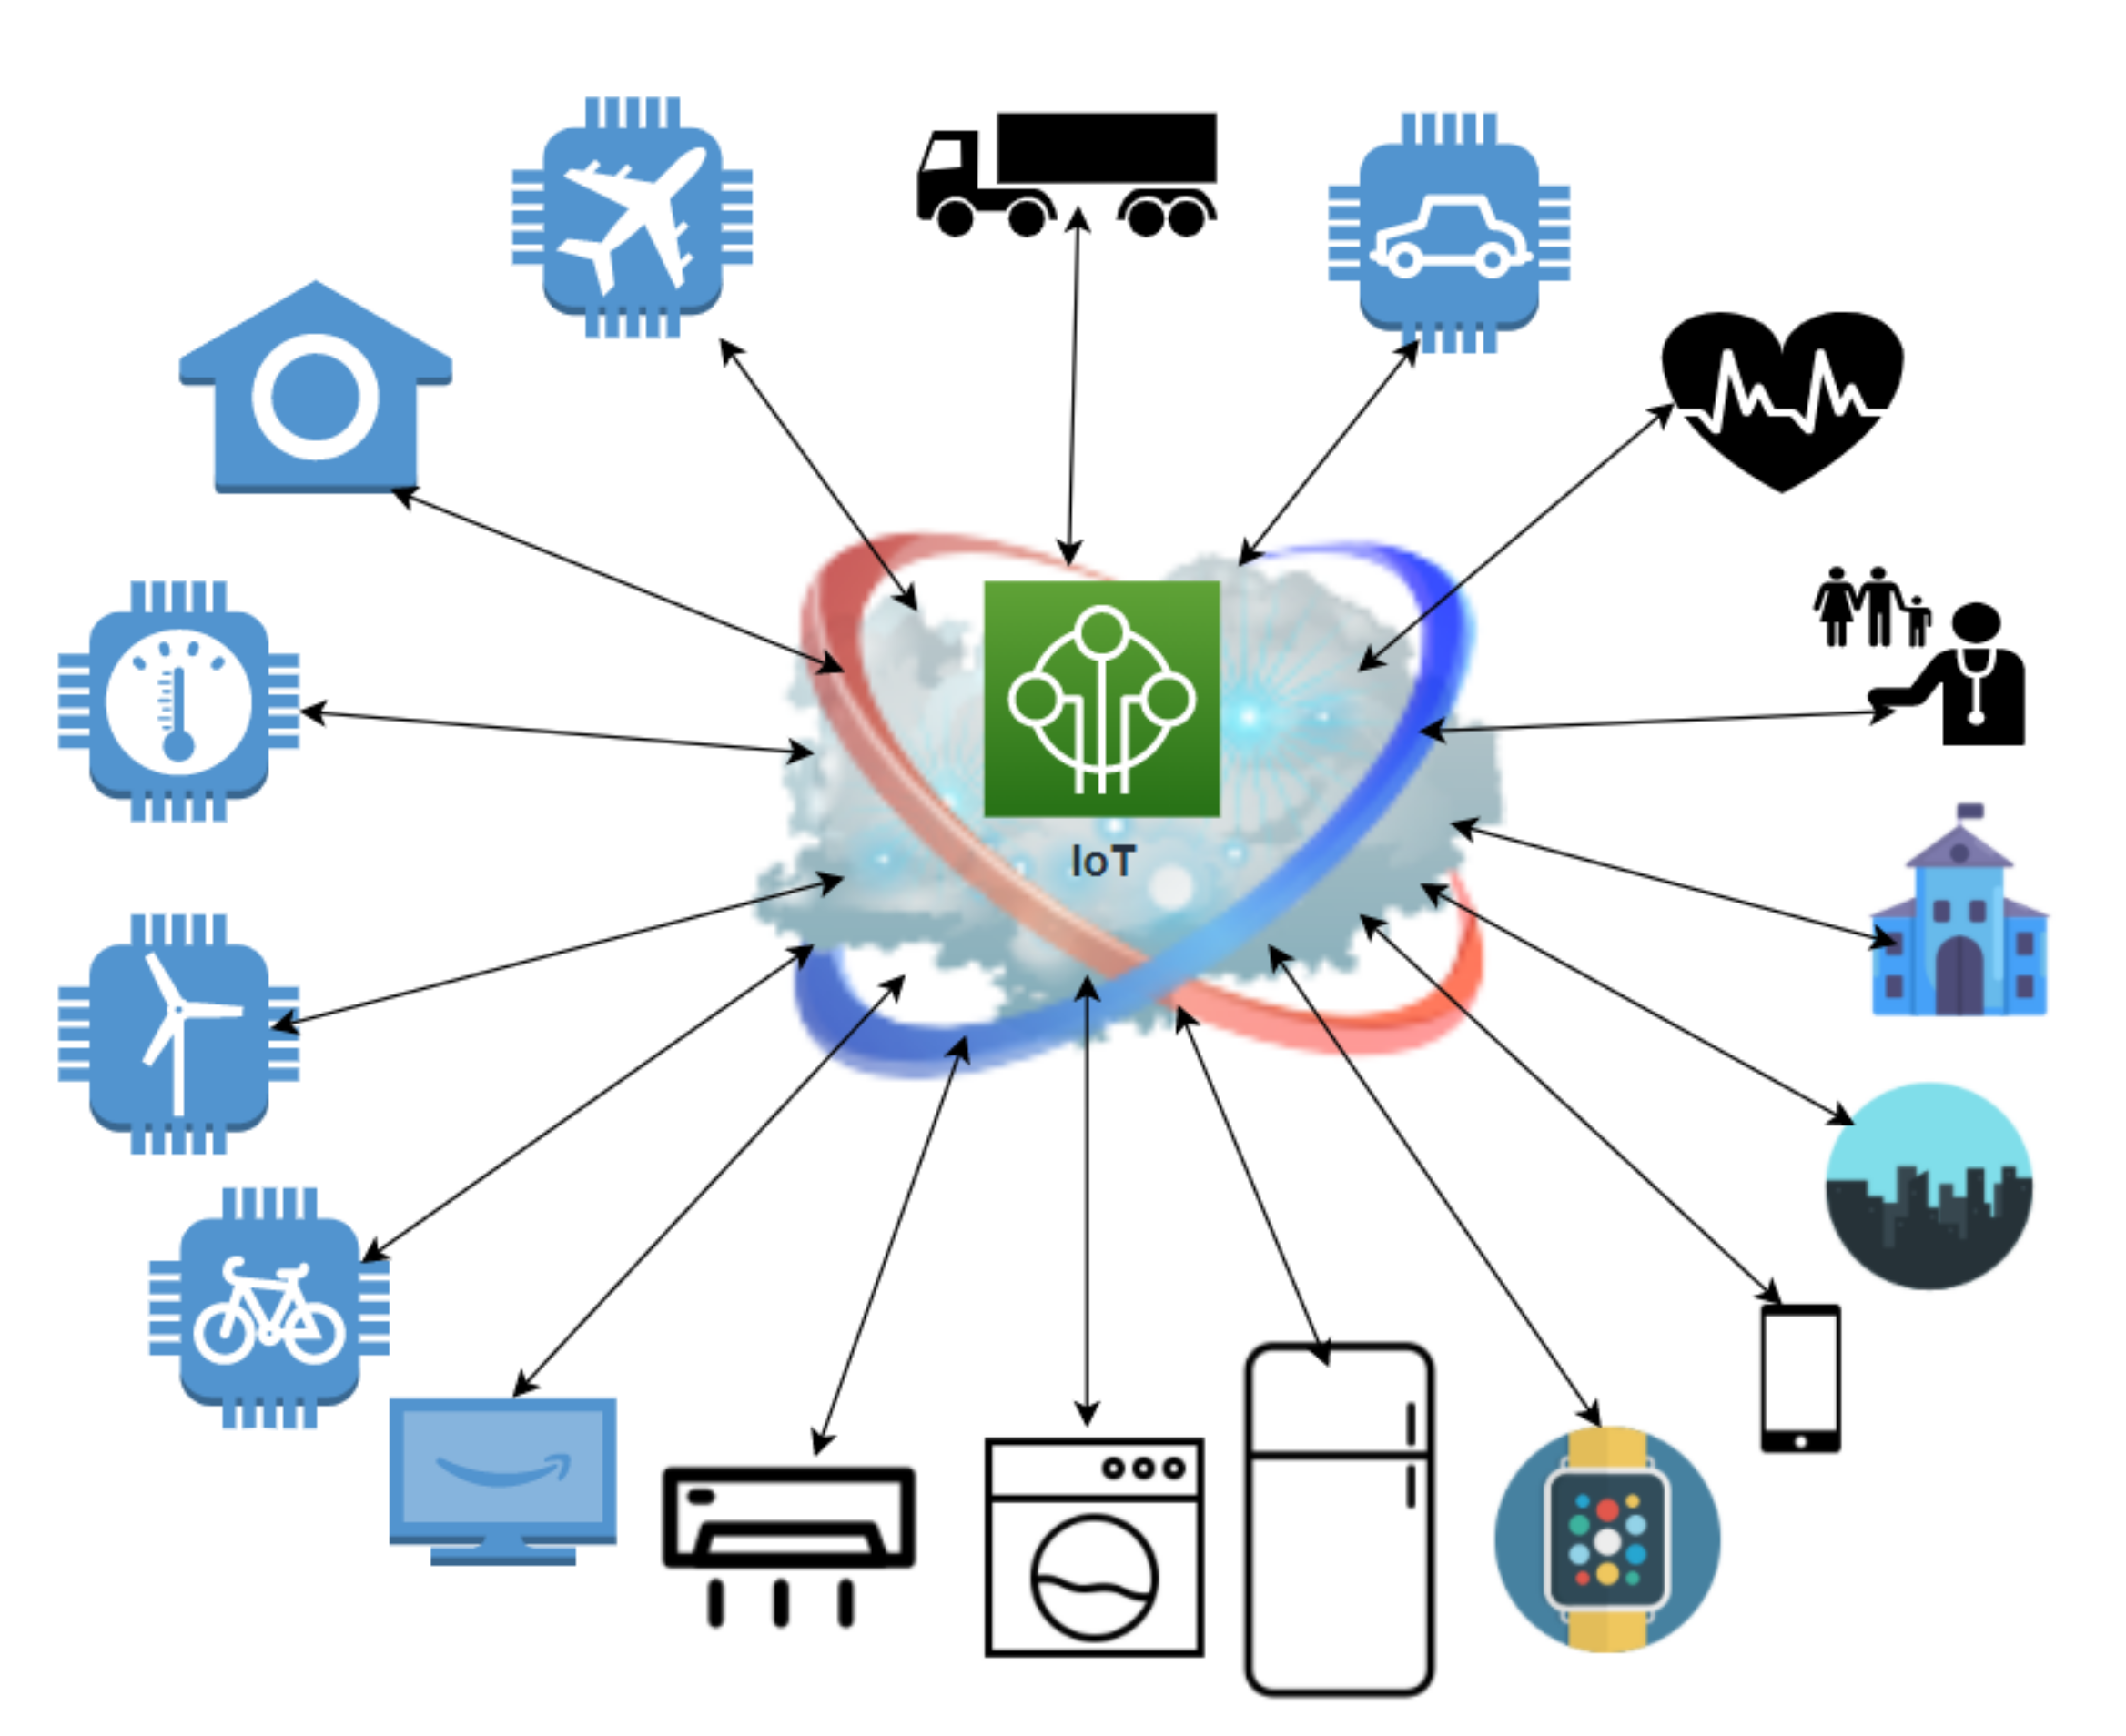 Digi Expands IoT Solutions for Medical, Smart Energy and